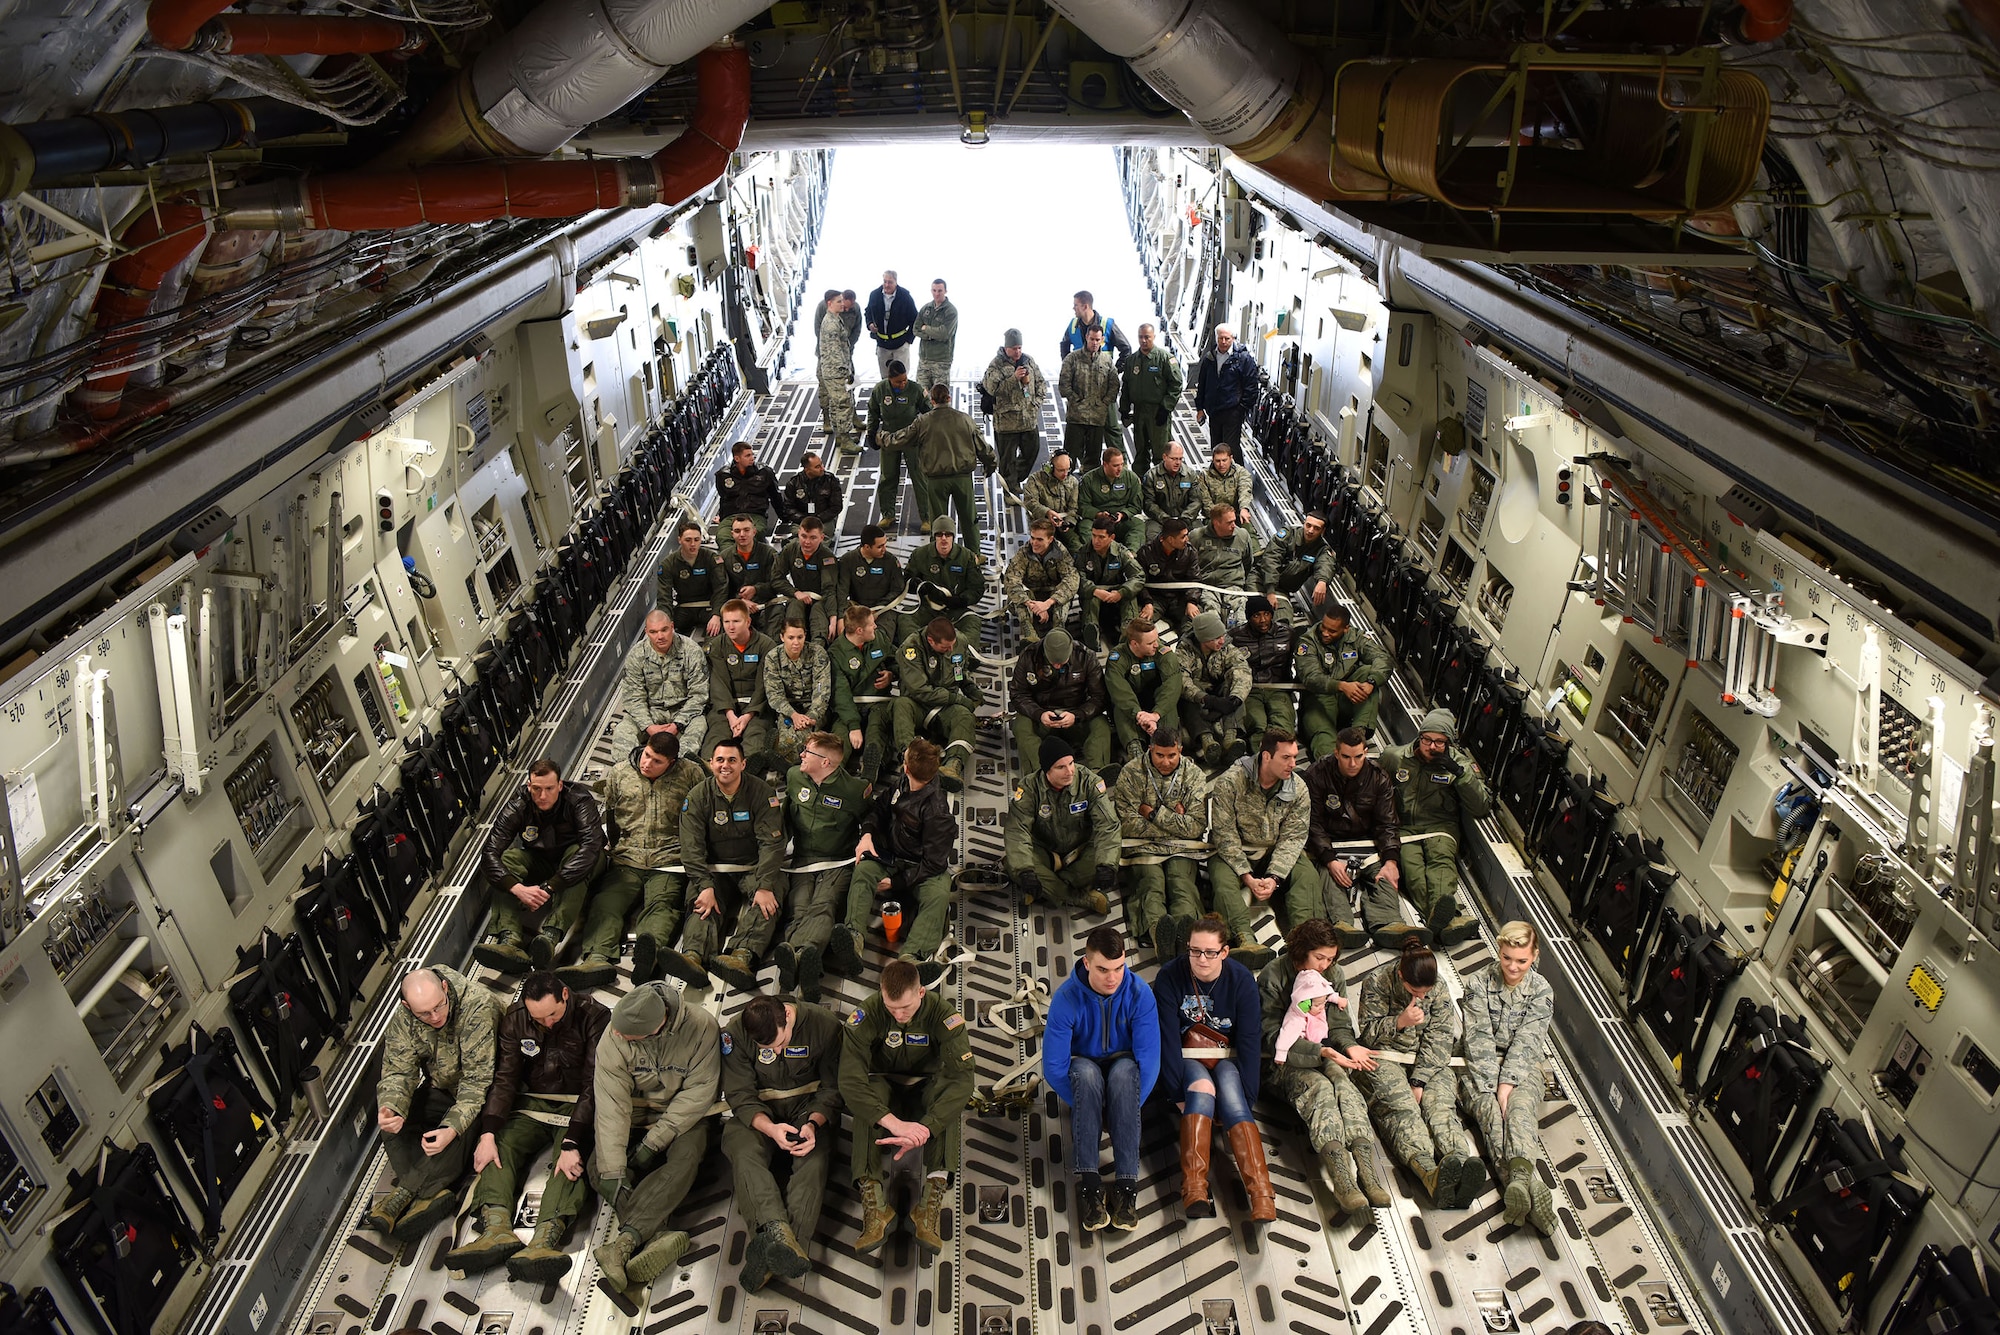 The 436th Aerial Port Squadron Passenger Terminal, the 3rd Airlift Squadron and the 9th Airlift Squadron conducted a Noncombatant Evacuation Order during a base exercise Feb. 23, 2018. Aboard a C-17 Globemaster III, crew members secure passengers in preparation for simulated evacuation during the exercise. (U.S. Air Force photo by Airman 1st Class Zoe M. Wockenfuss)